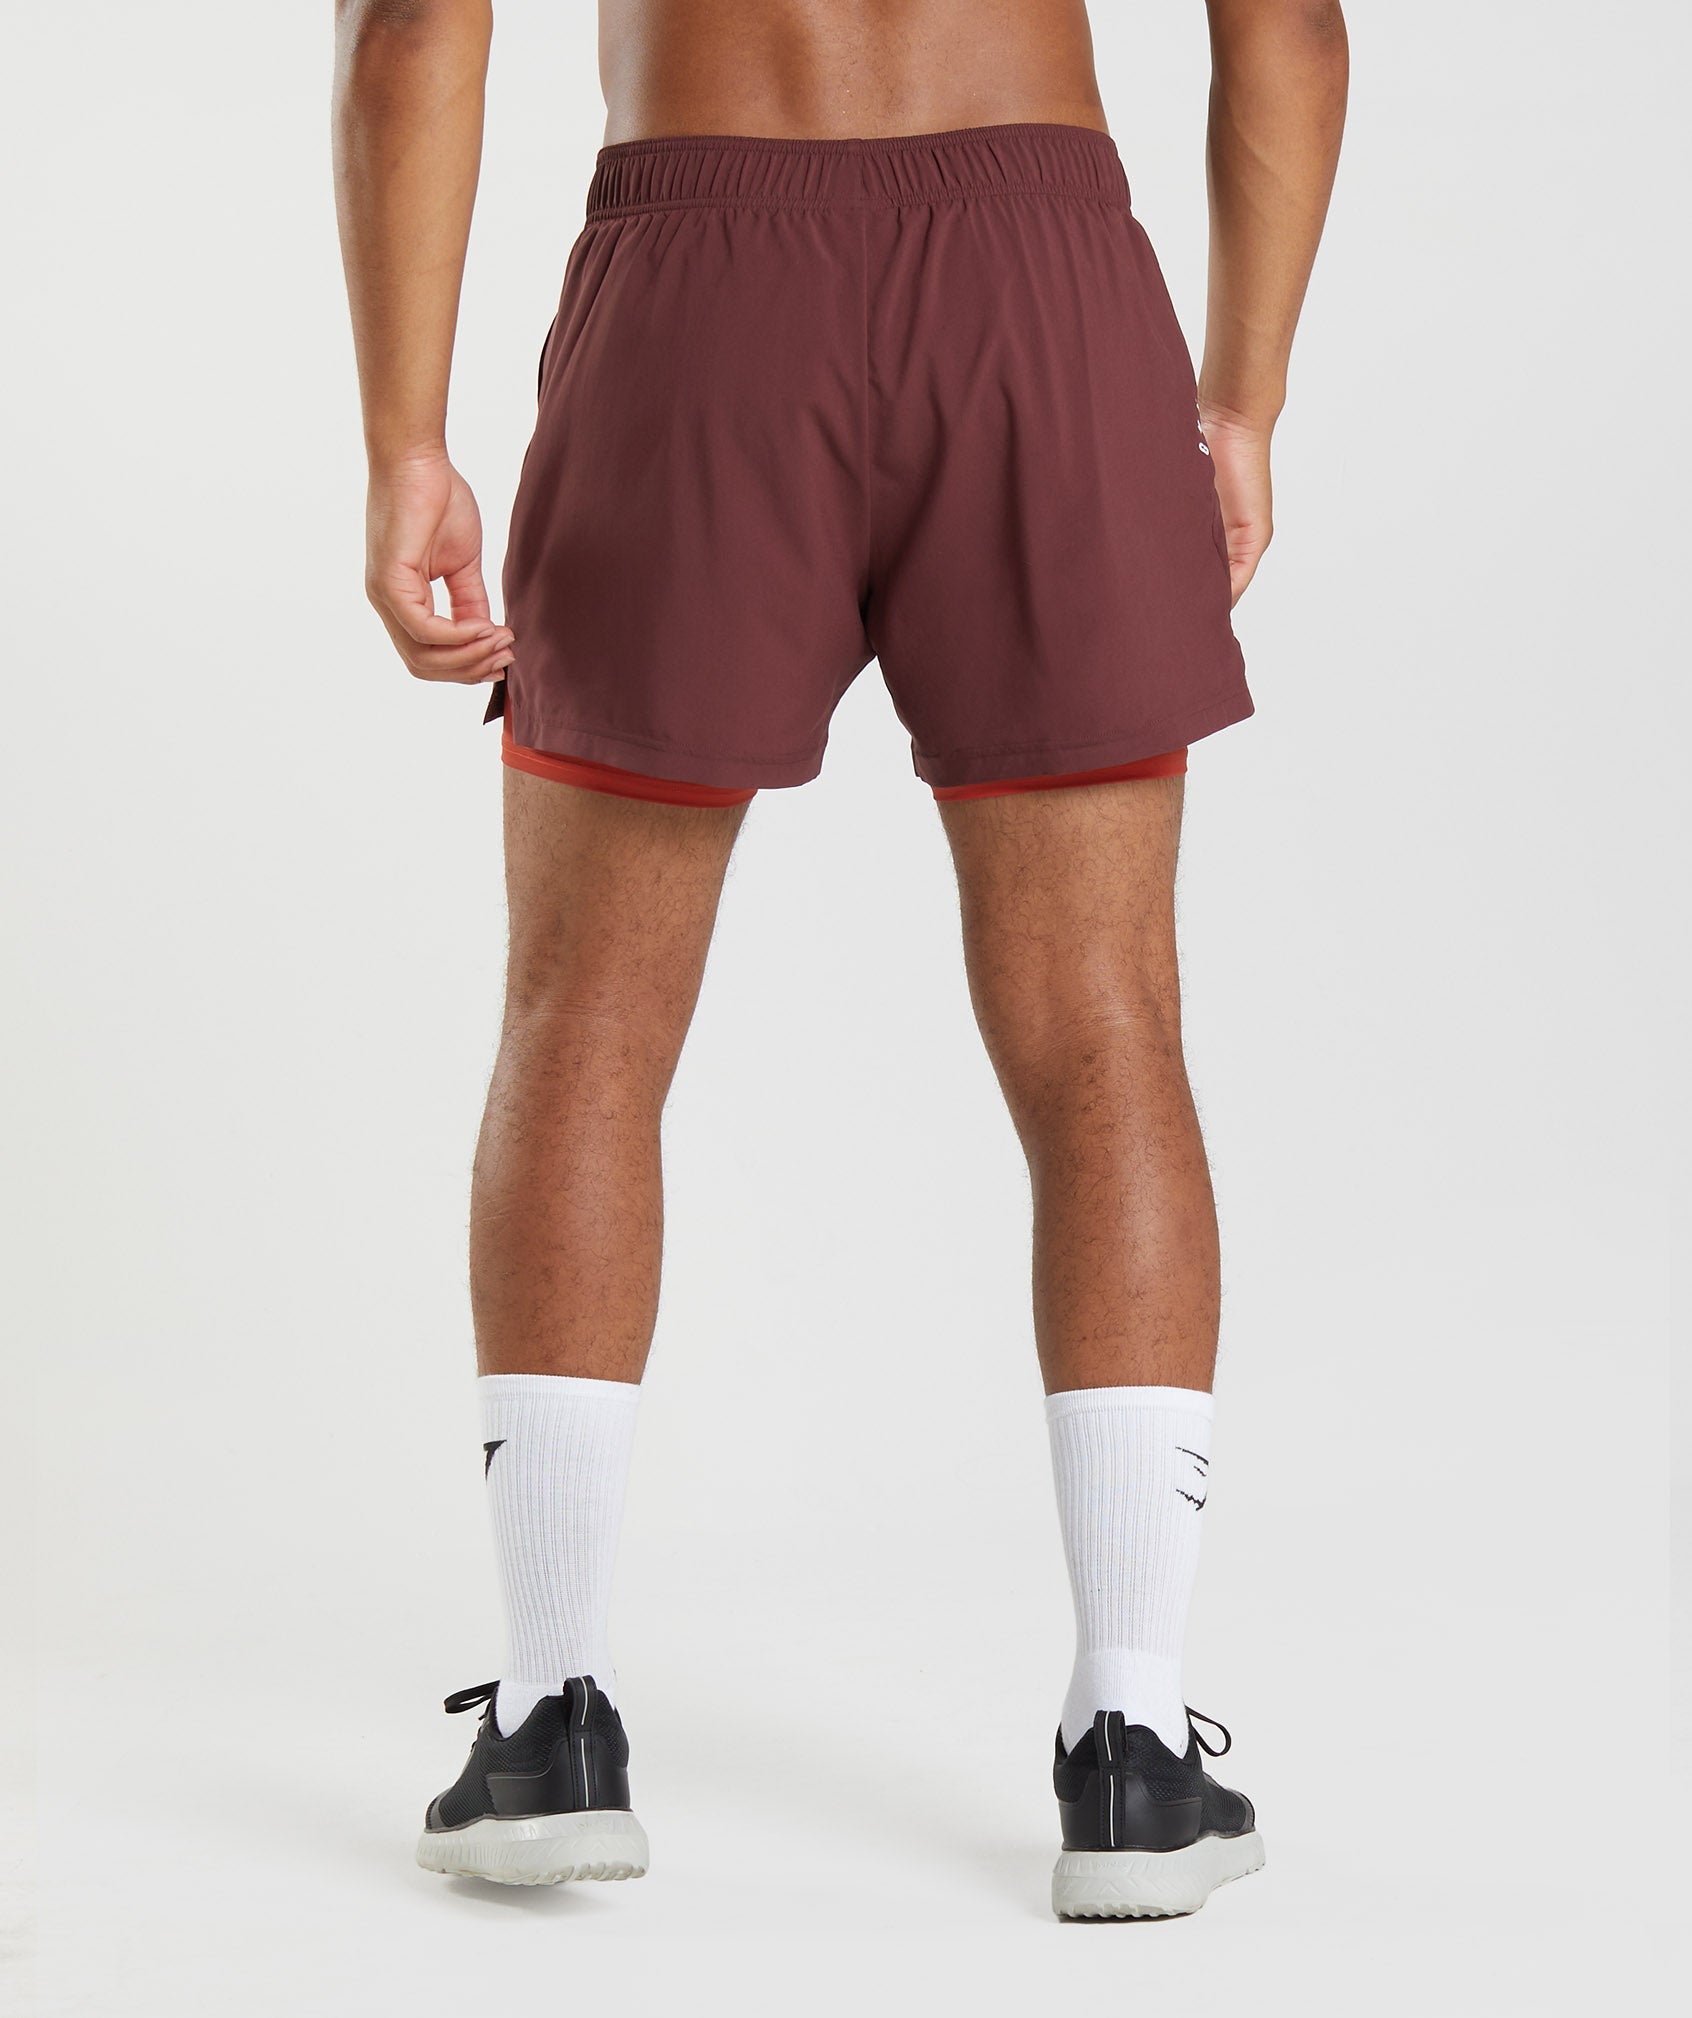 Sport 5" 2 In 1 Shorts in Baked Maroon/Salsa Red - view 2